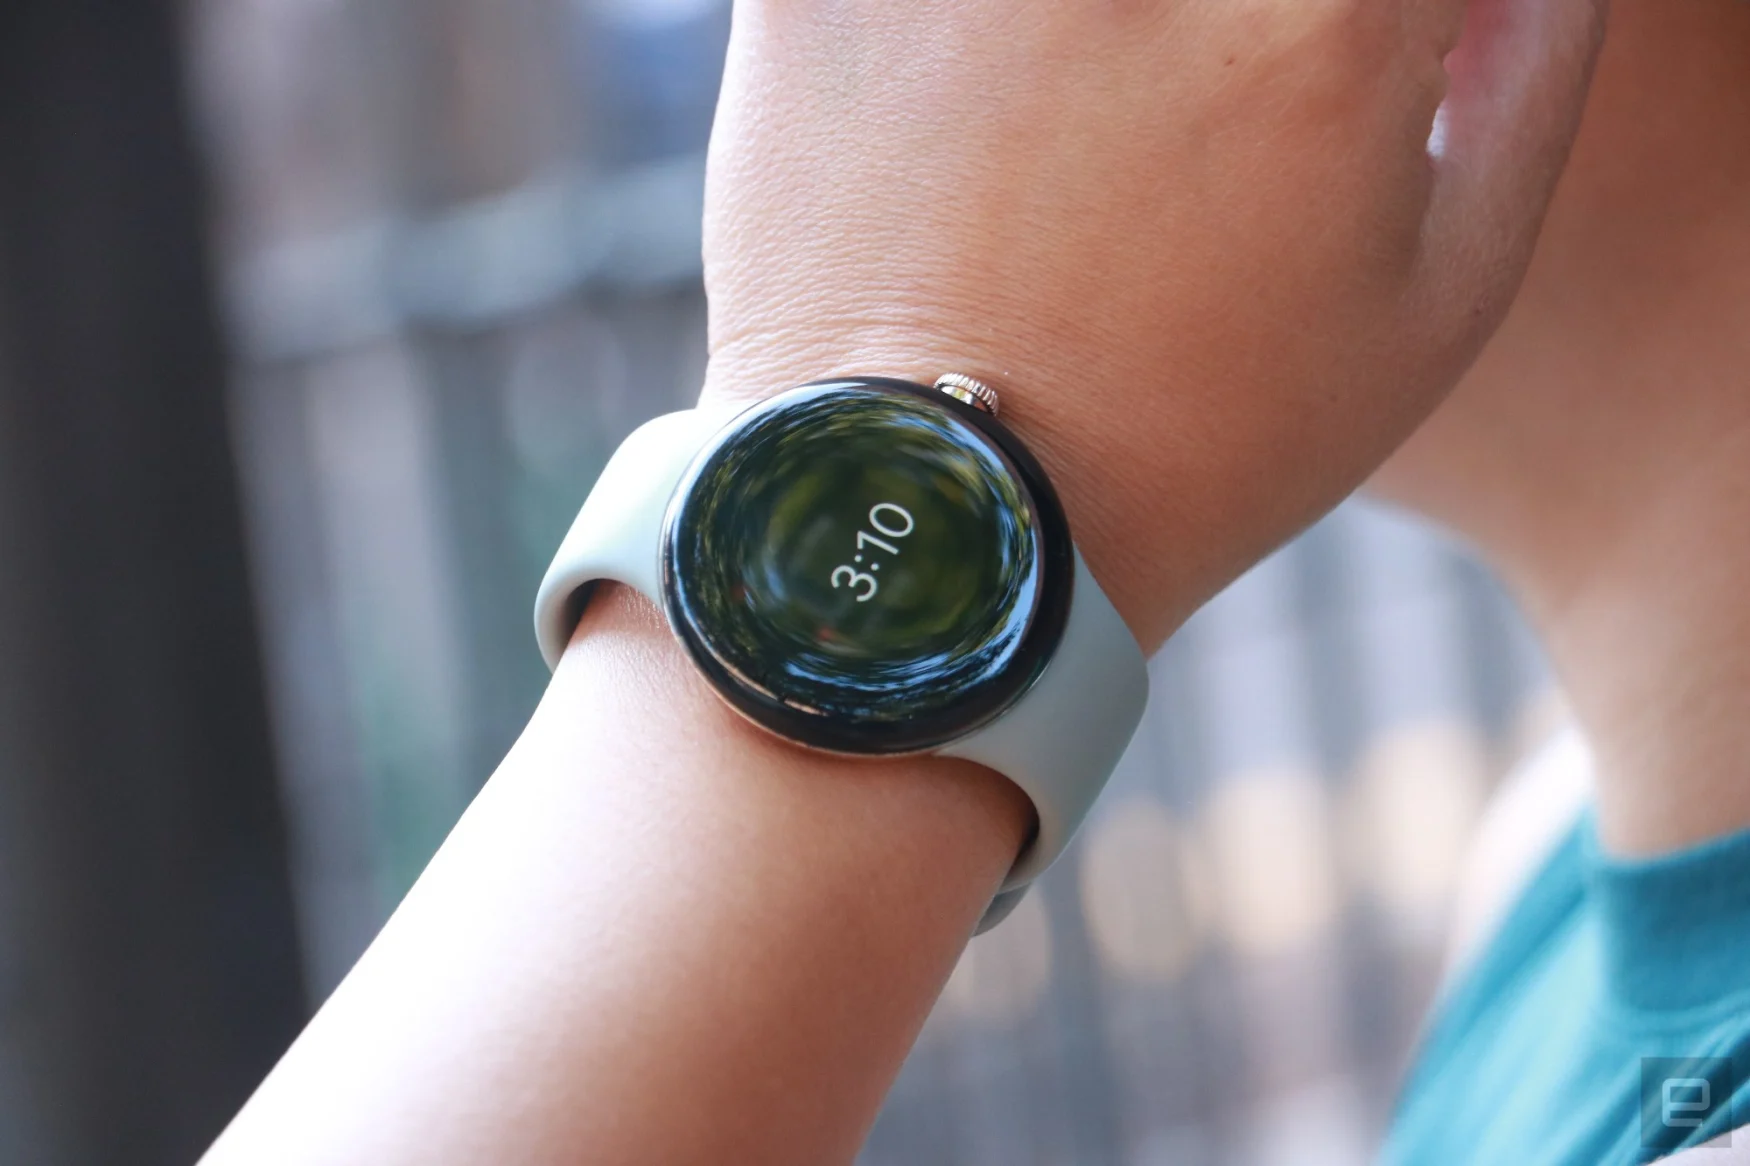 The Pixel Watch on a person's wrist, showing the time as an Always On Display.